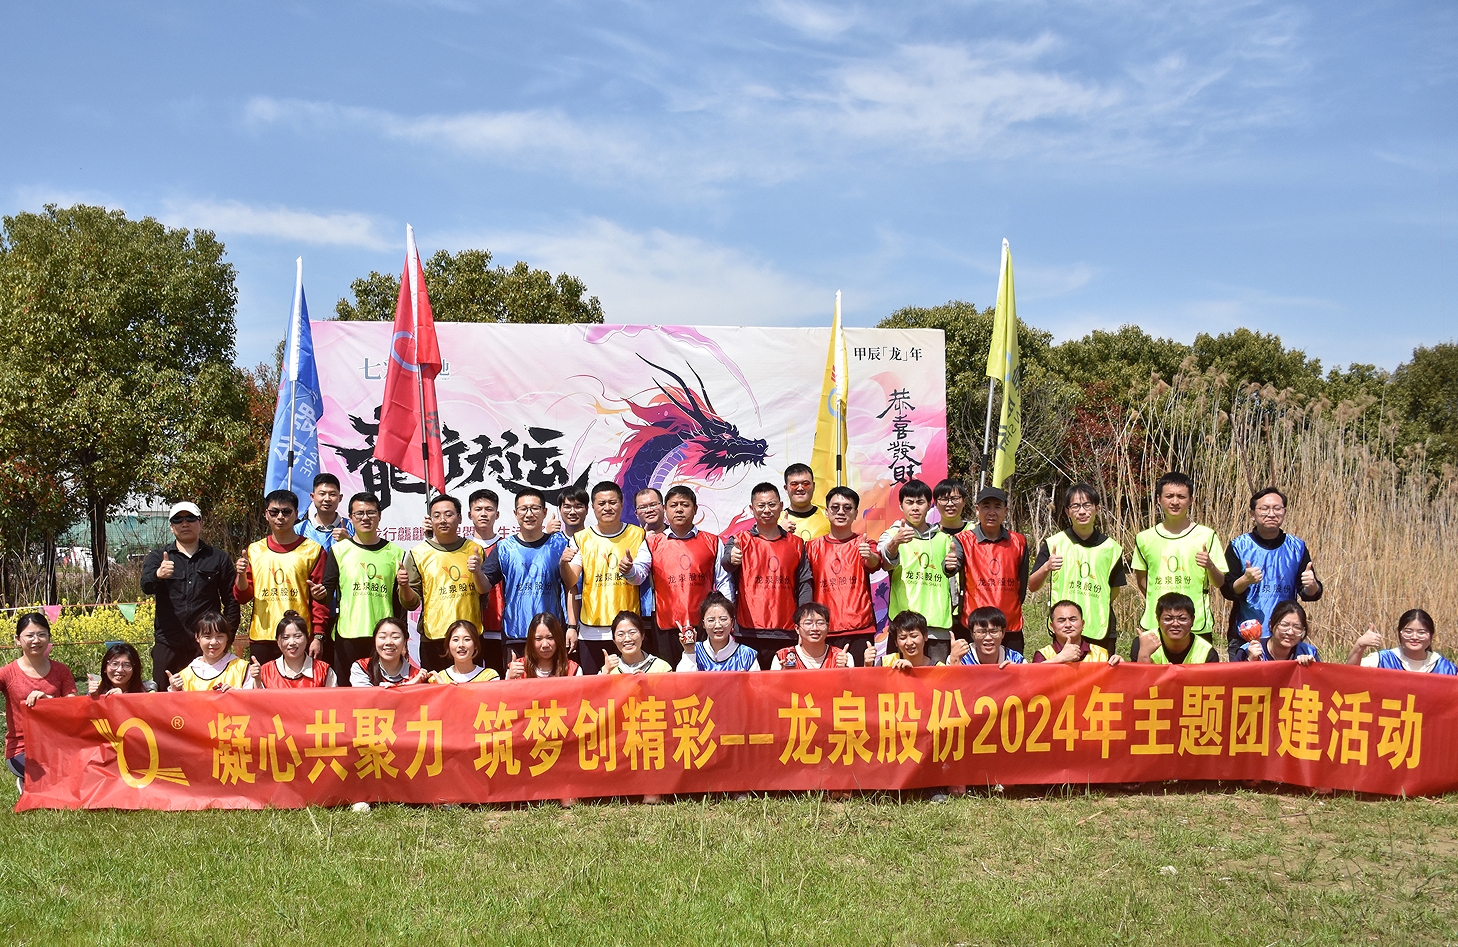 [Condensing Heart and Gathering Strength, Building Dreams and Creating Wonderful] Longquan Stock Company Launching 2024 Theme Group Building Activities!